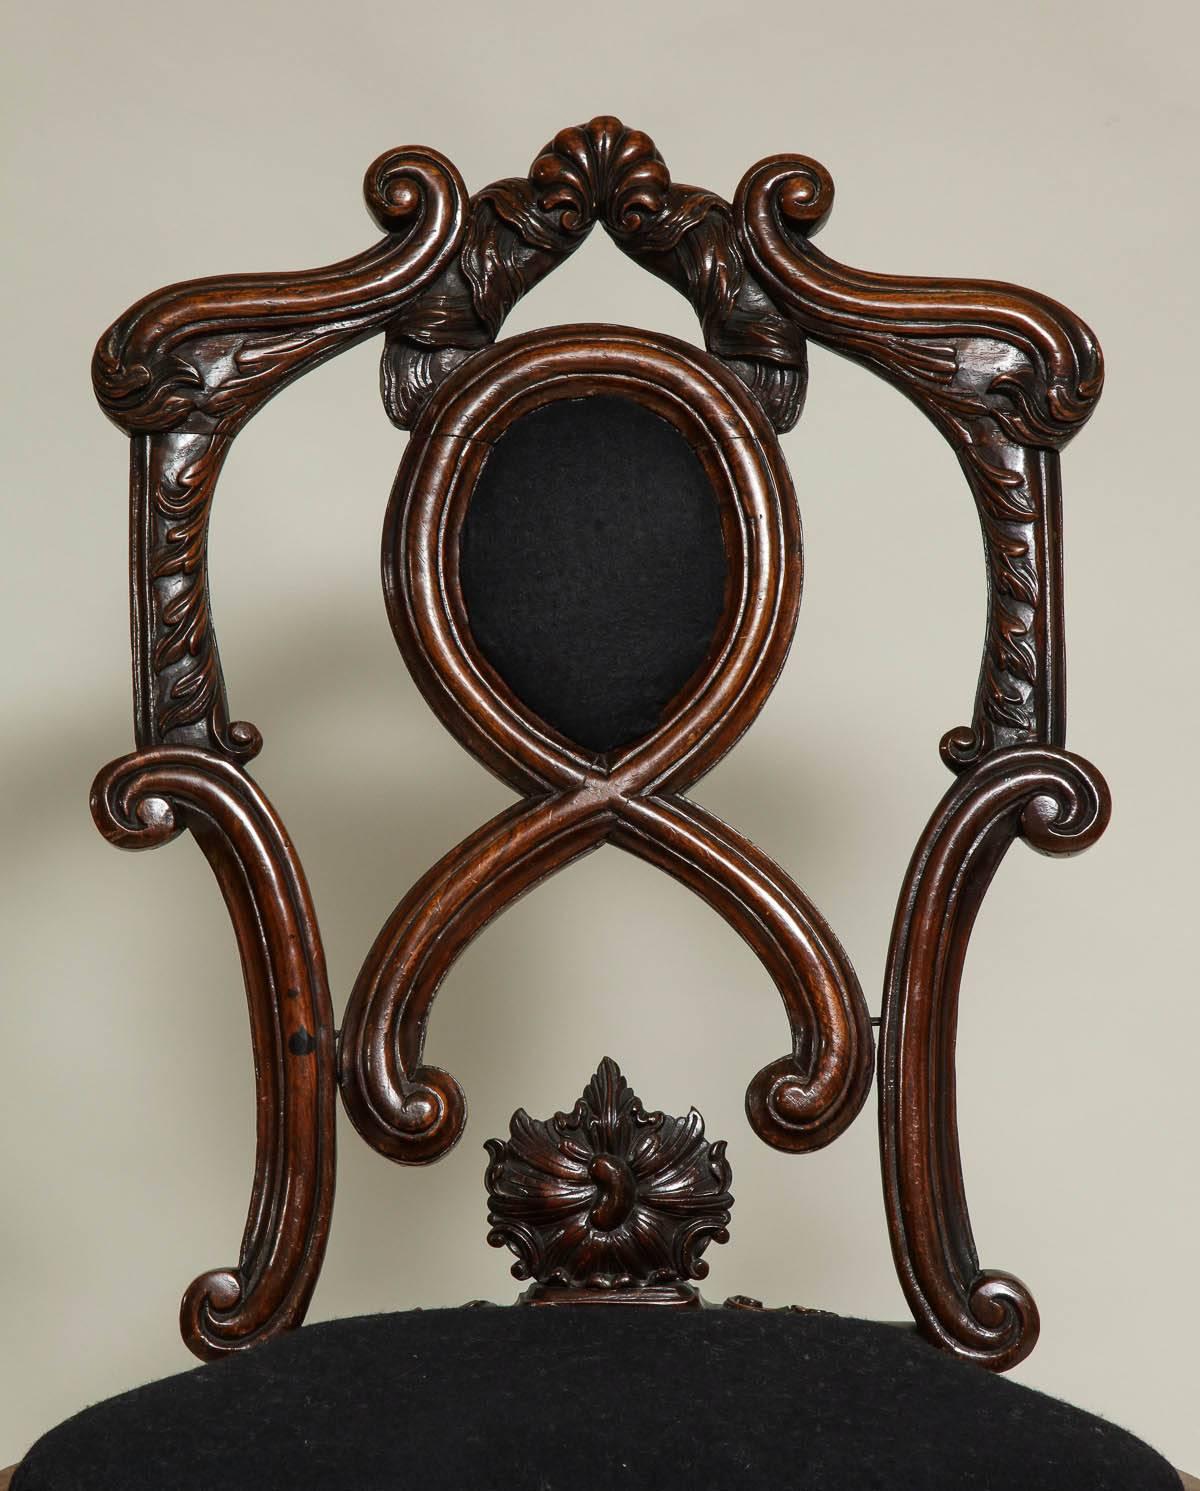 Bold 18th century Portuguese period side chair with scroll and stylized lion tail carving, the upholstered balloon seat over scrolled and outward rolled apron, standing on boldly carved lion paw feet with curly hair, the whole constructed of solid